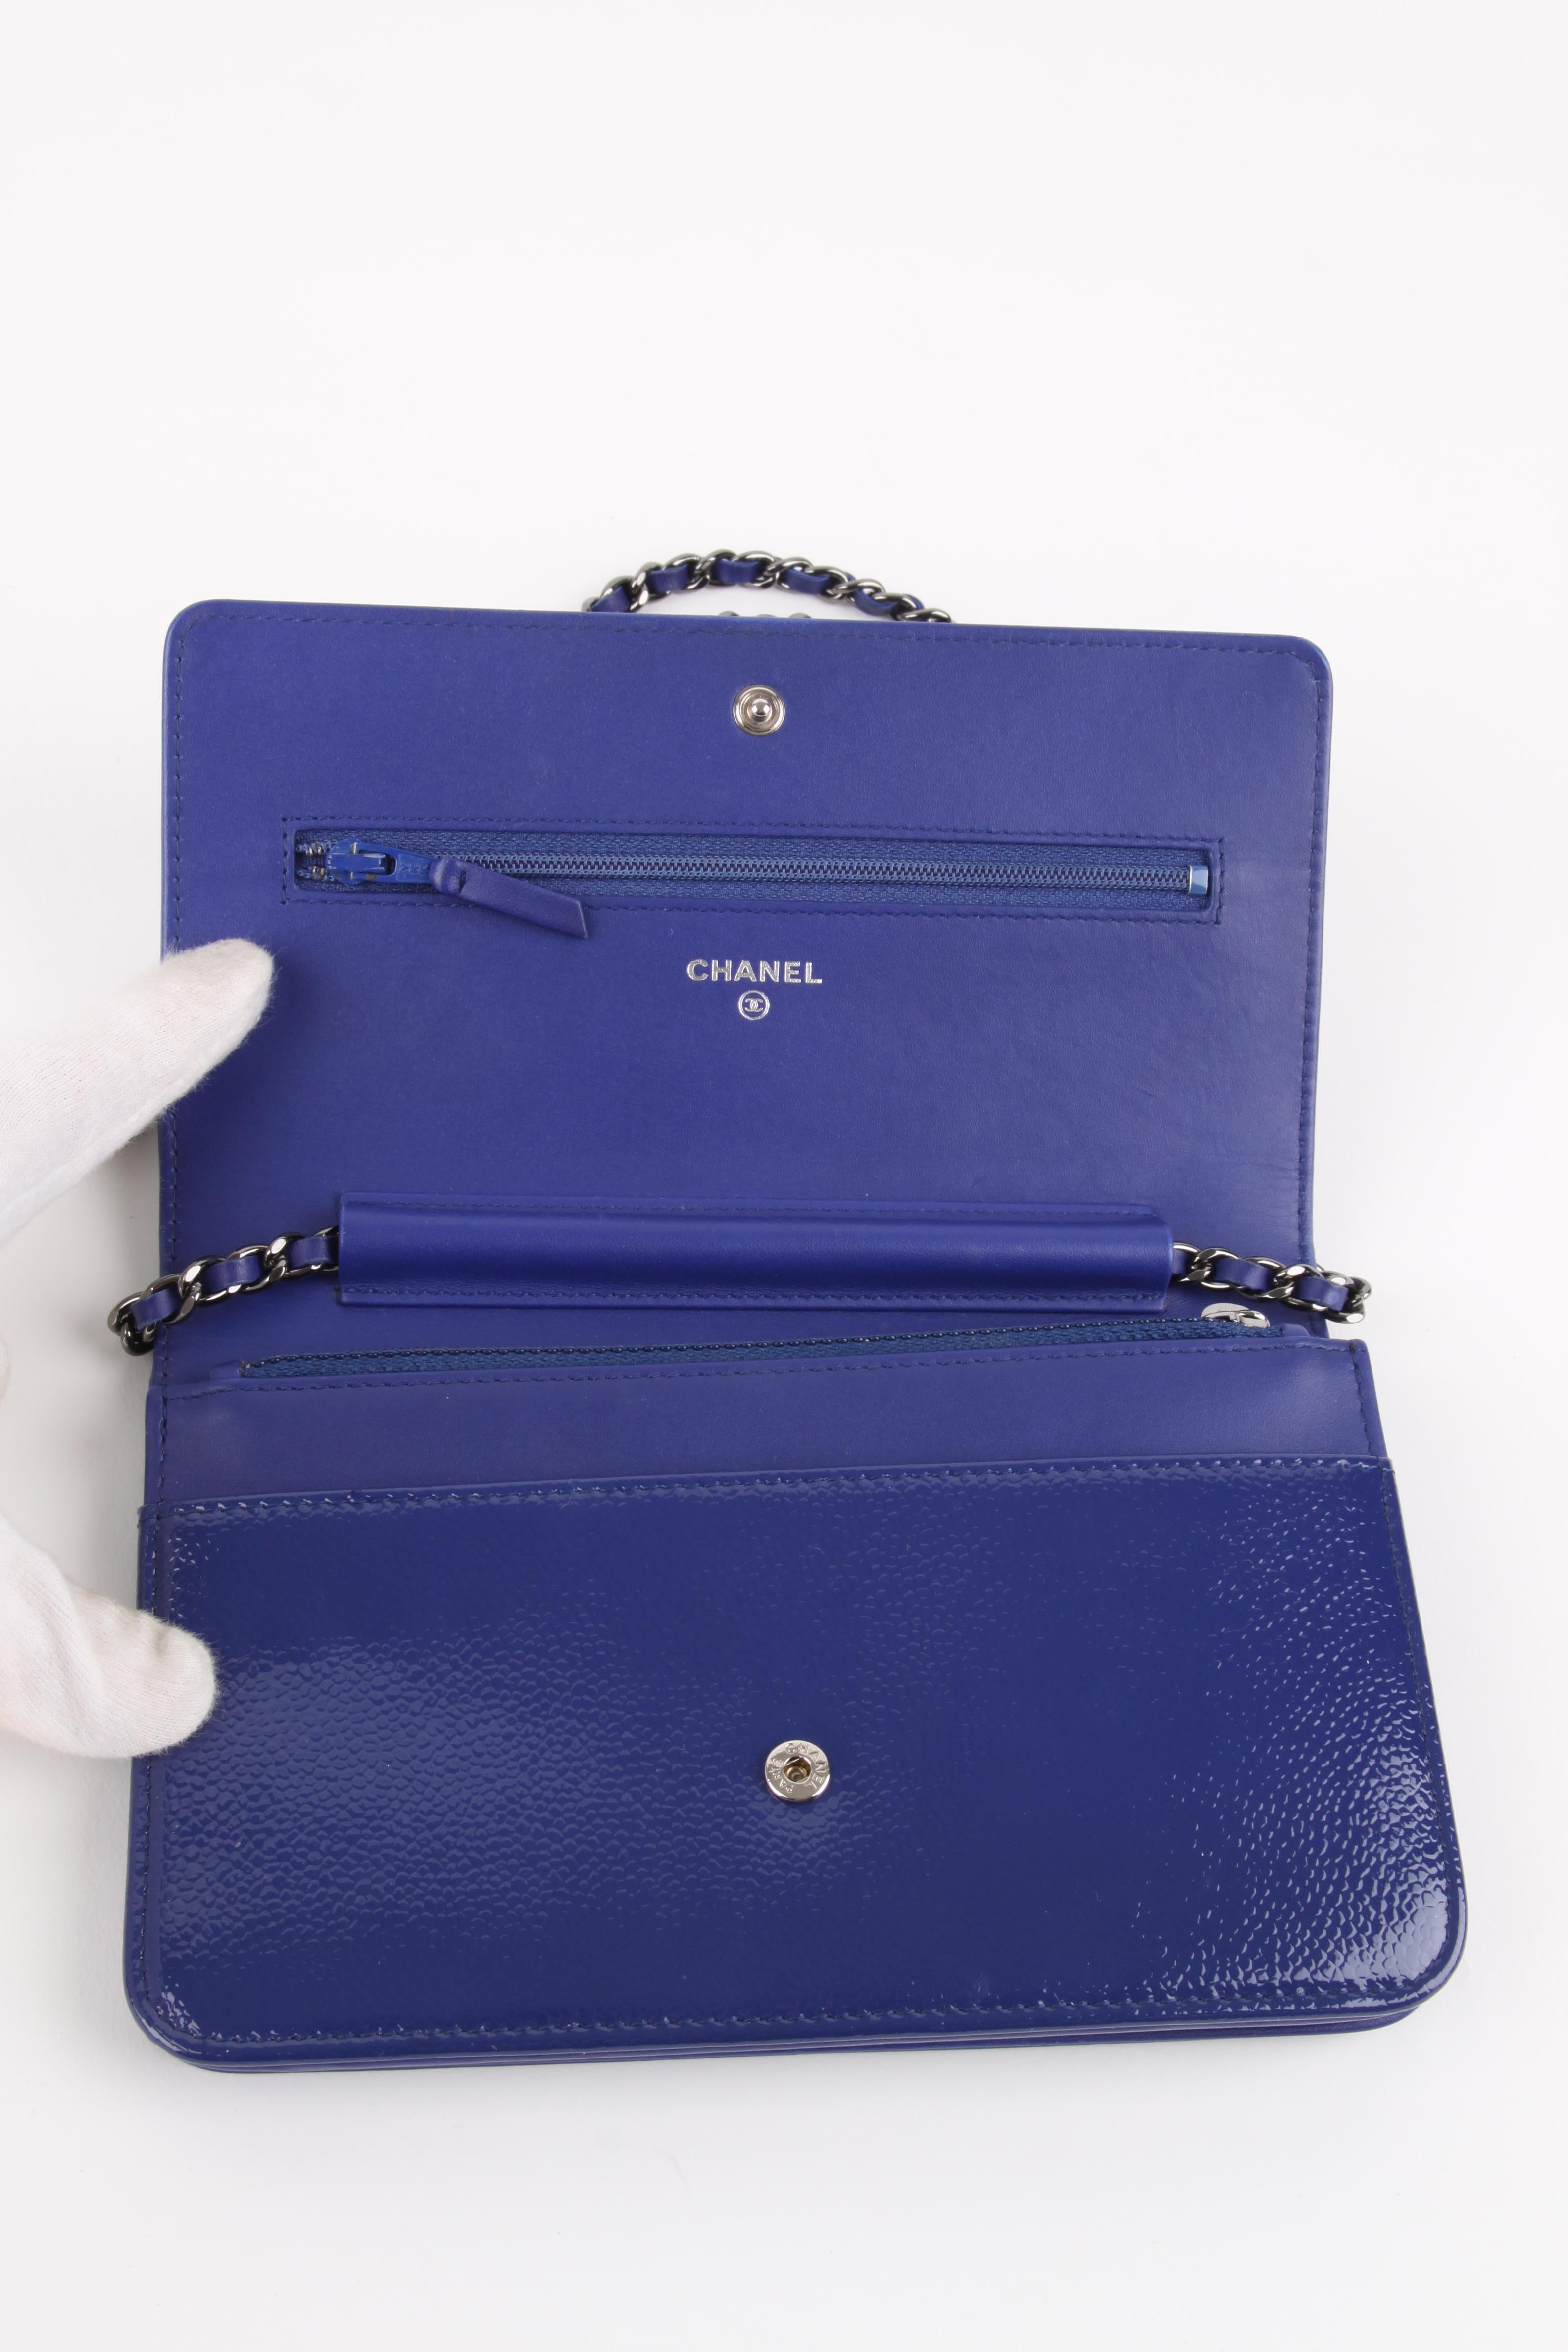 Women's or Men's Chanel Wallet On Chain WOC Bag Patent Leather - blue/silver For Sale